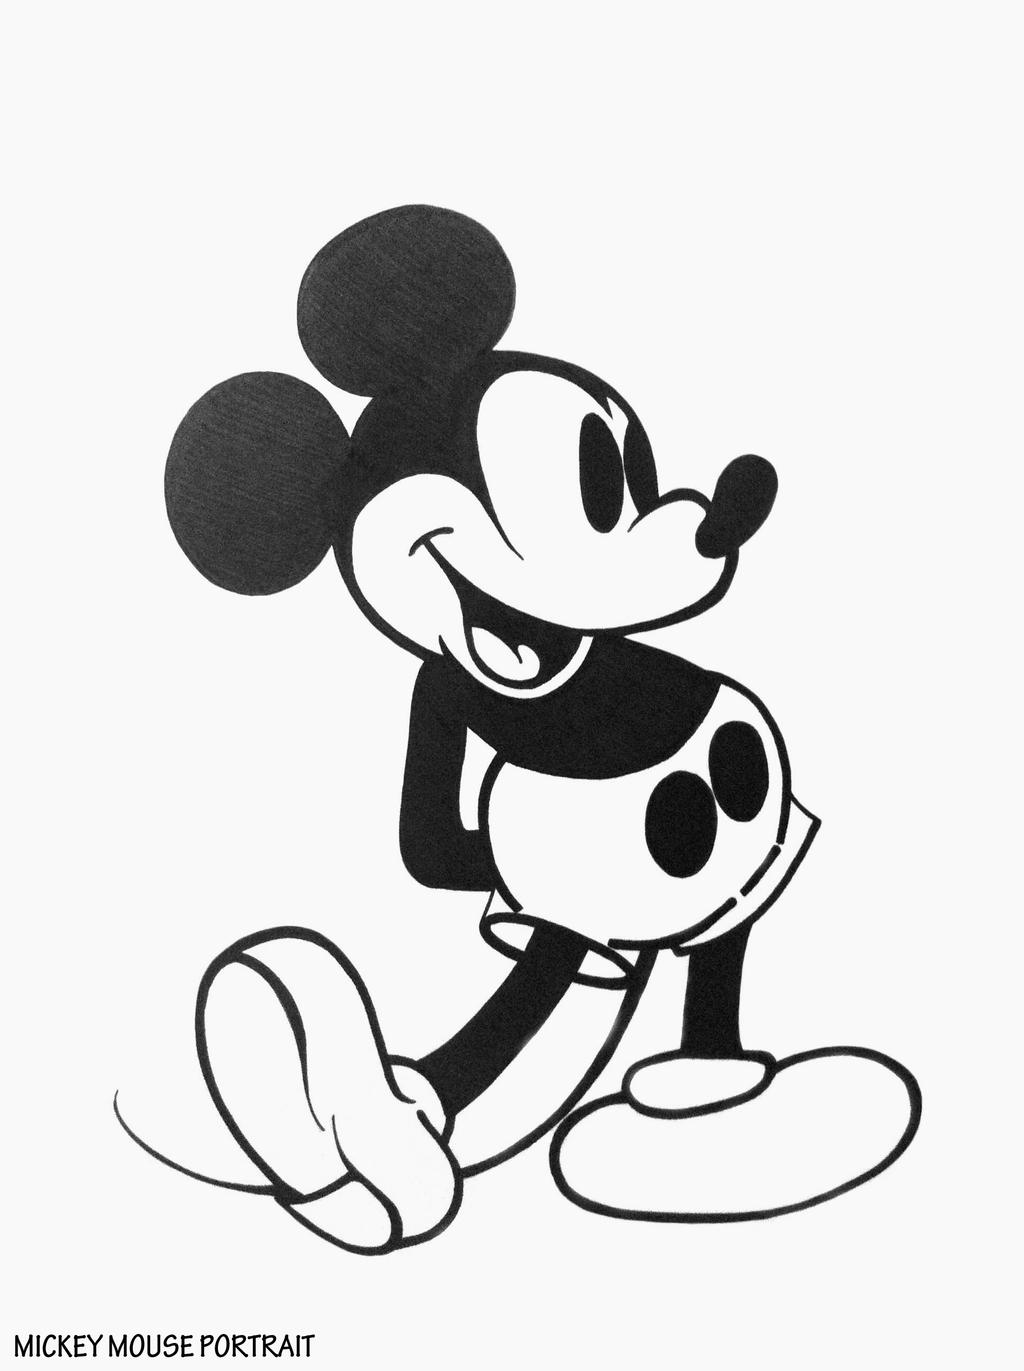 Mickey Mouse drawing by BluePencils on DeviantArt